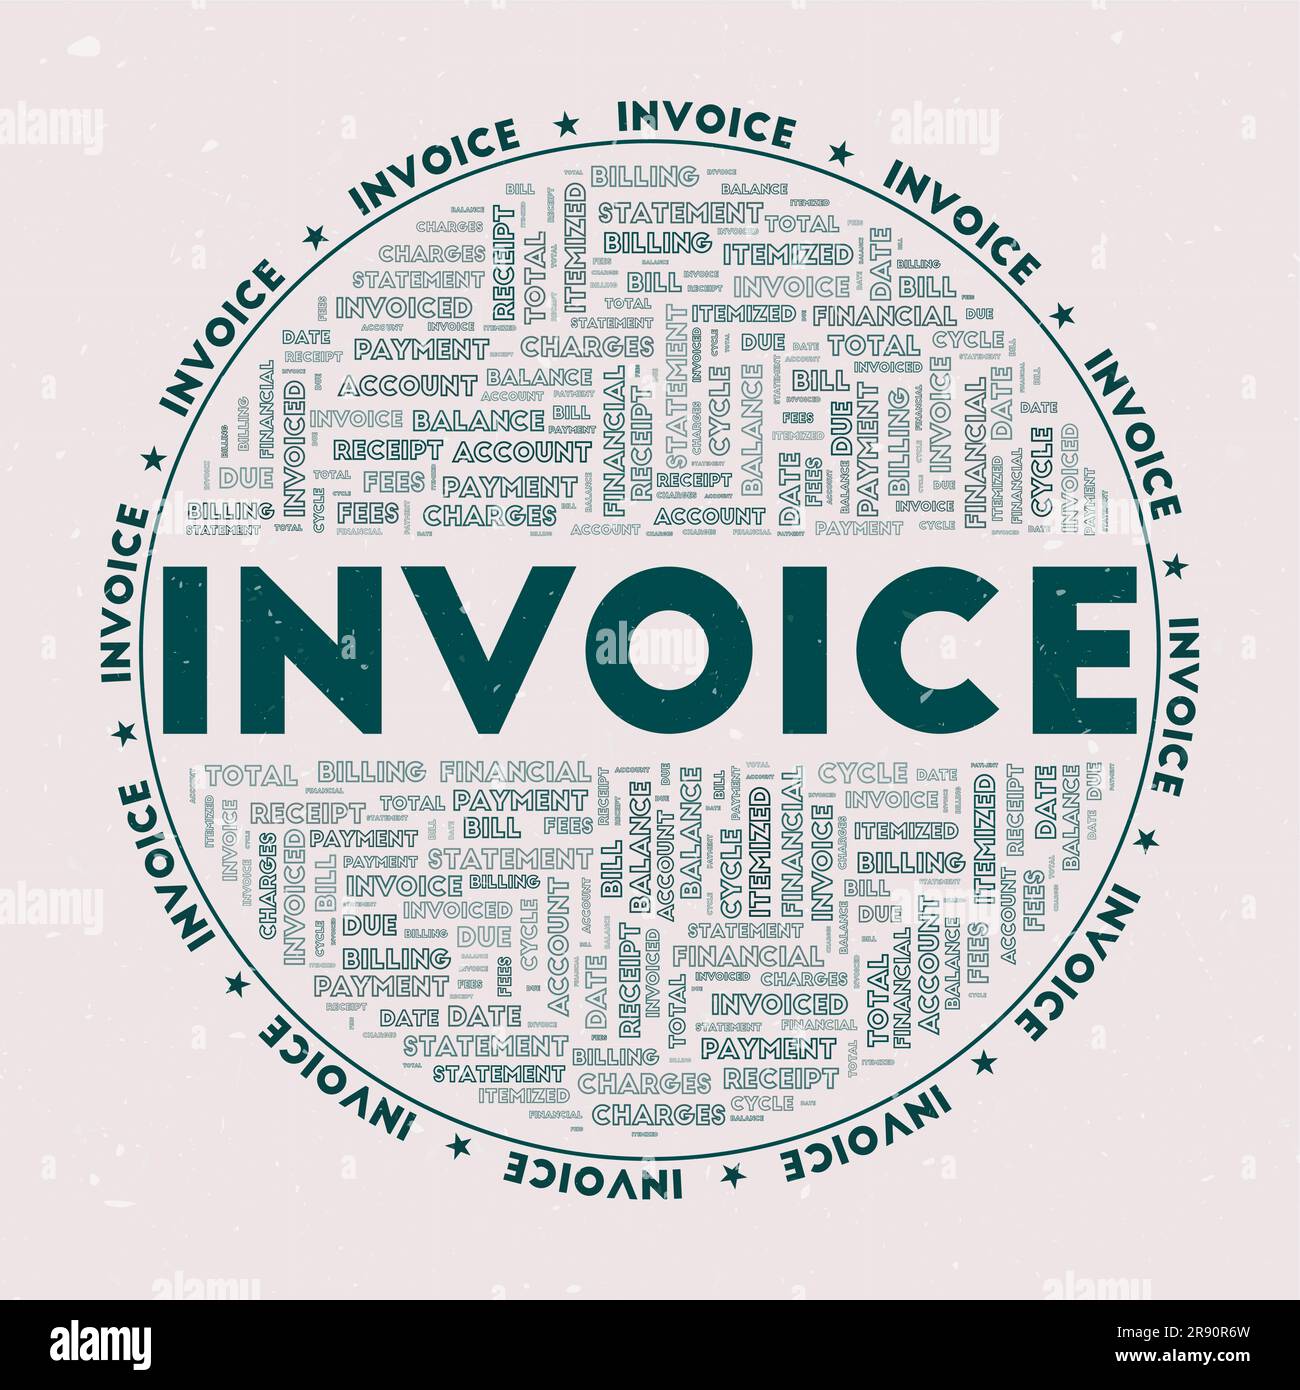 Invoice - round badge. Text invoice with keywords word clouds and circular text. Tropical Forest color theme and grunge texture. Radiant vector illust Stock Vector